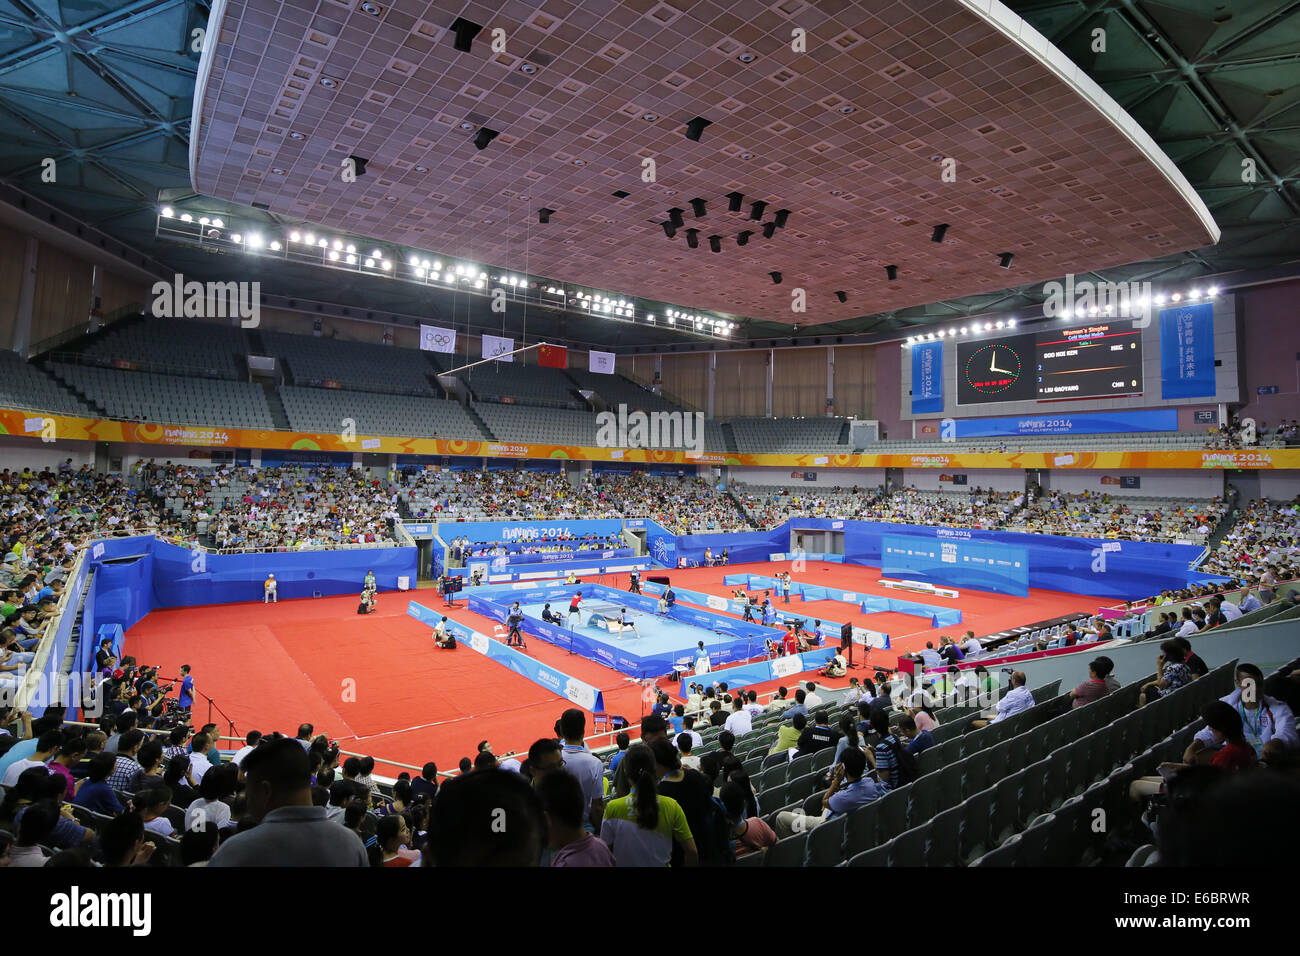 Nanjing, China. 20th Aug, 2014. Wutaishan Sports Center, August 20, 2014 - Table Tennis : General view of Wutaishan Sports Center during the 2014 Summer Youth Olympic Games in Nanjing, China. Credit:  Yusuke Nakanishi/AFLO SPORT/Alamy Live News Stock Photo